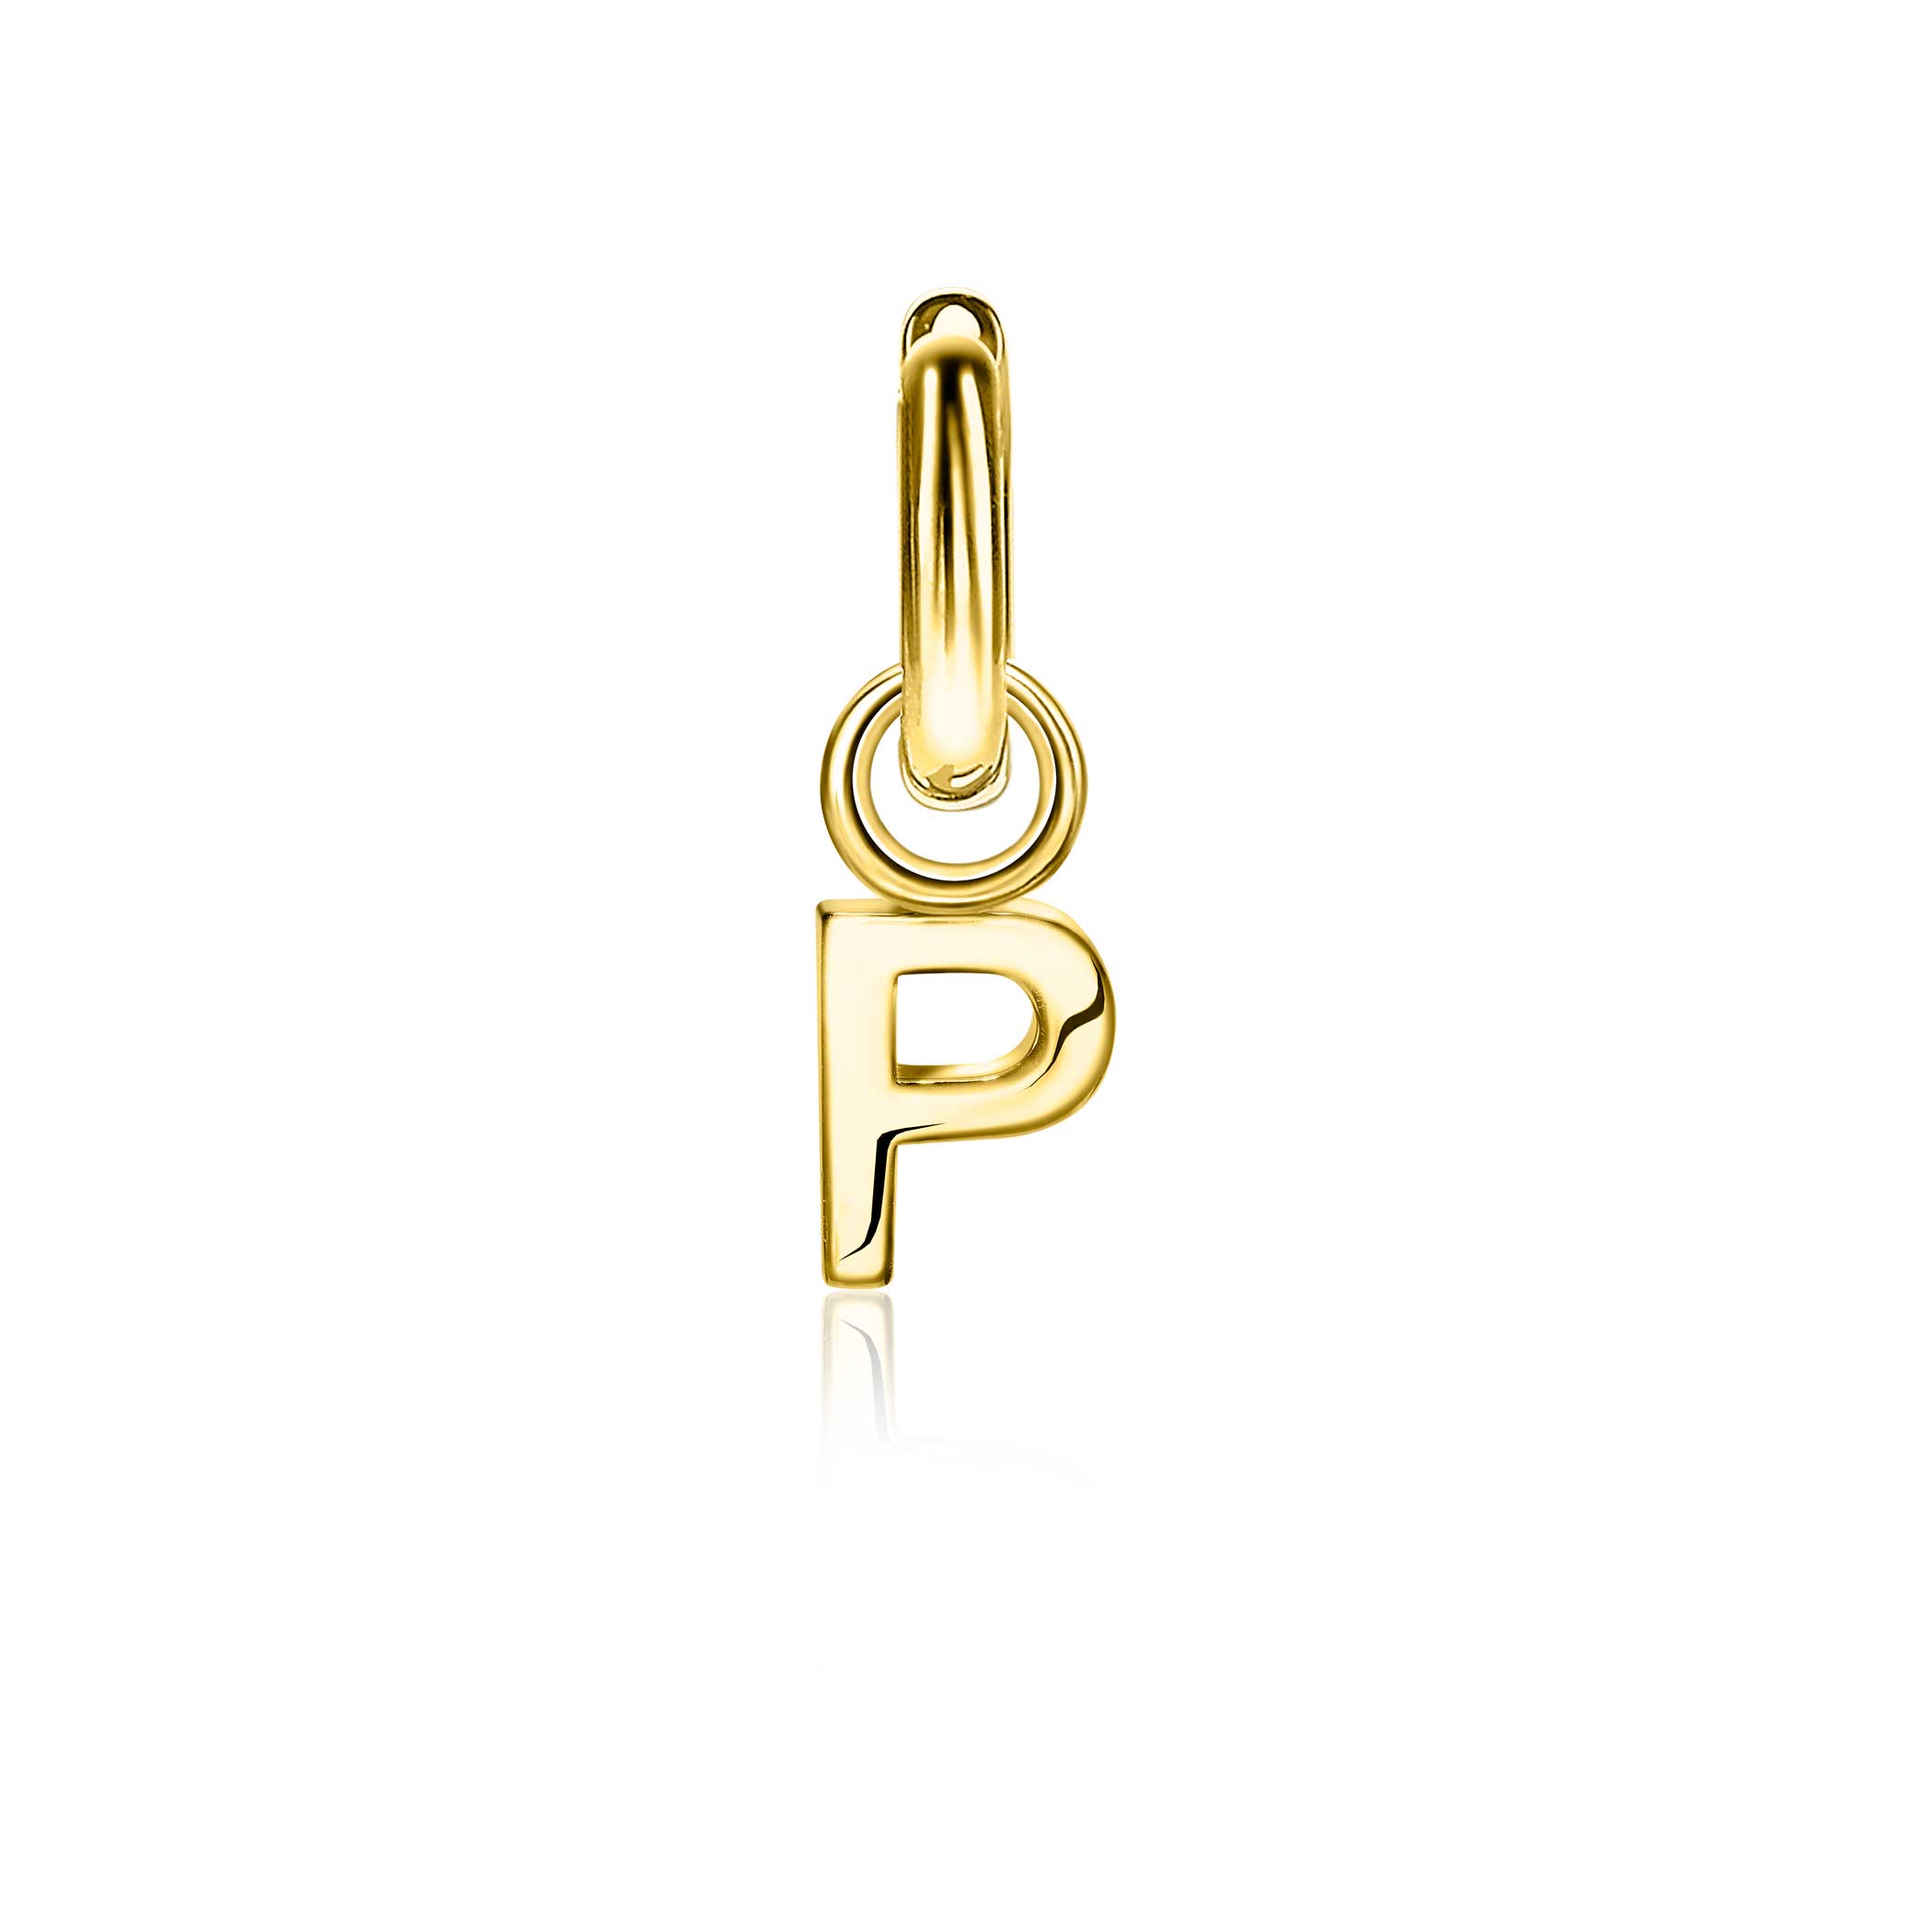 ZINZI Gold Plated Letter Earrings Pendant P price per piece ZICH2145P (excl. hoop earrings)